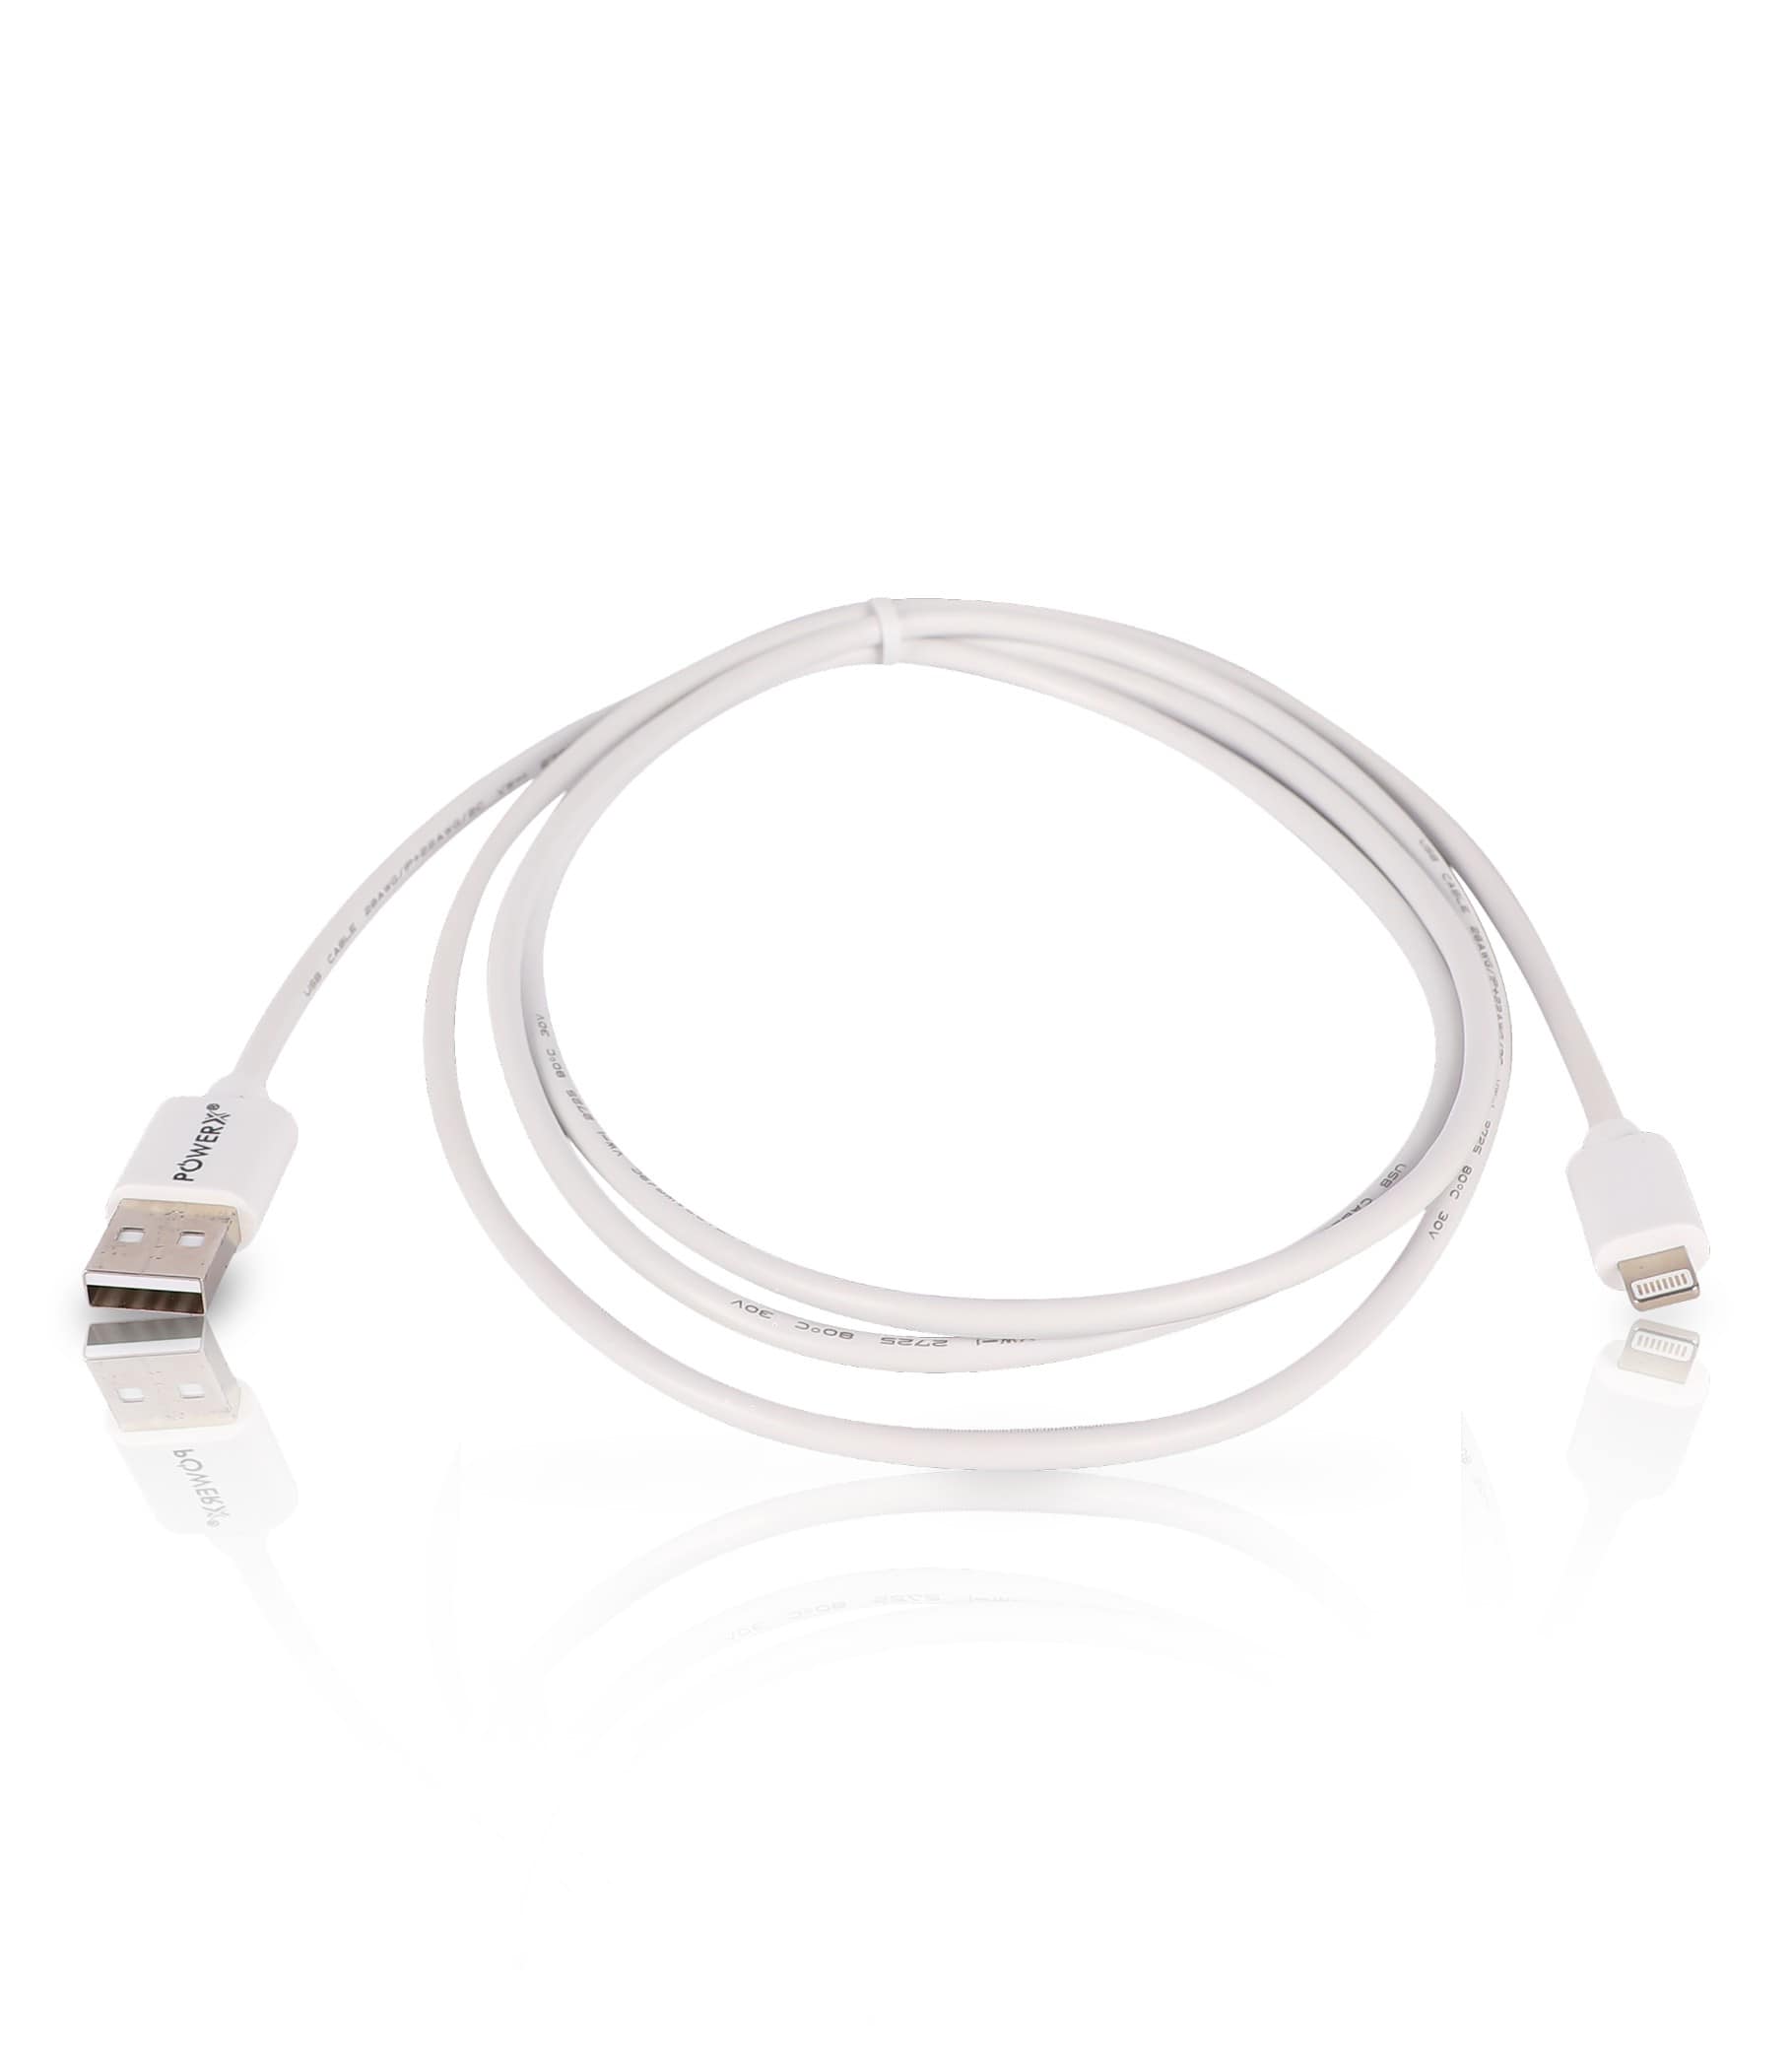 2.4A FAST CHARGING A TO LIGHTNING CABLE